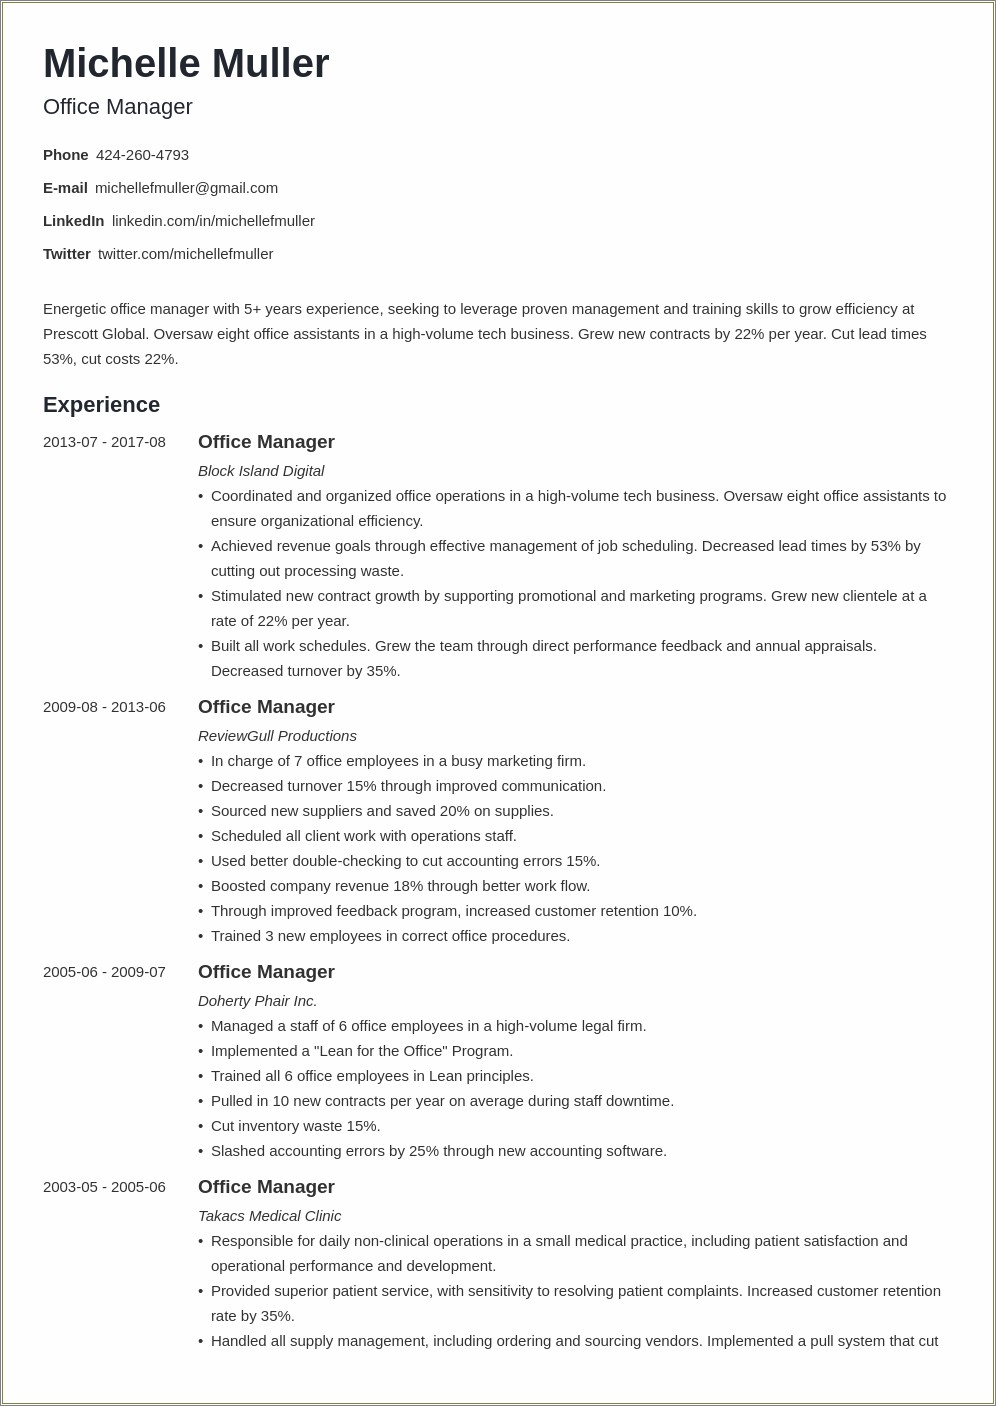 Resume Example With Multiple Positions Within